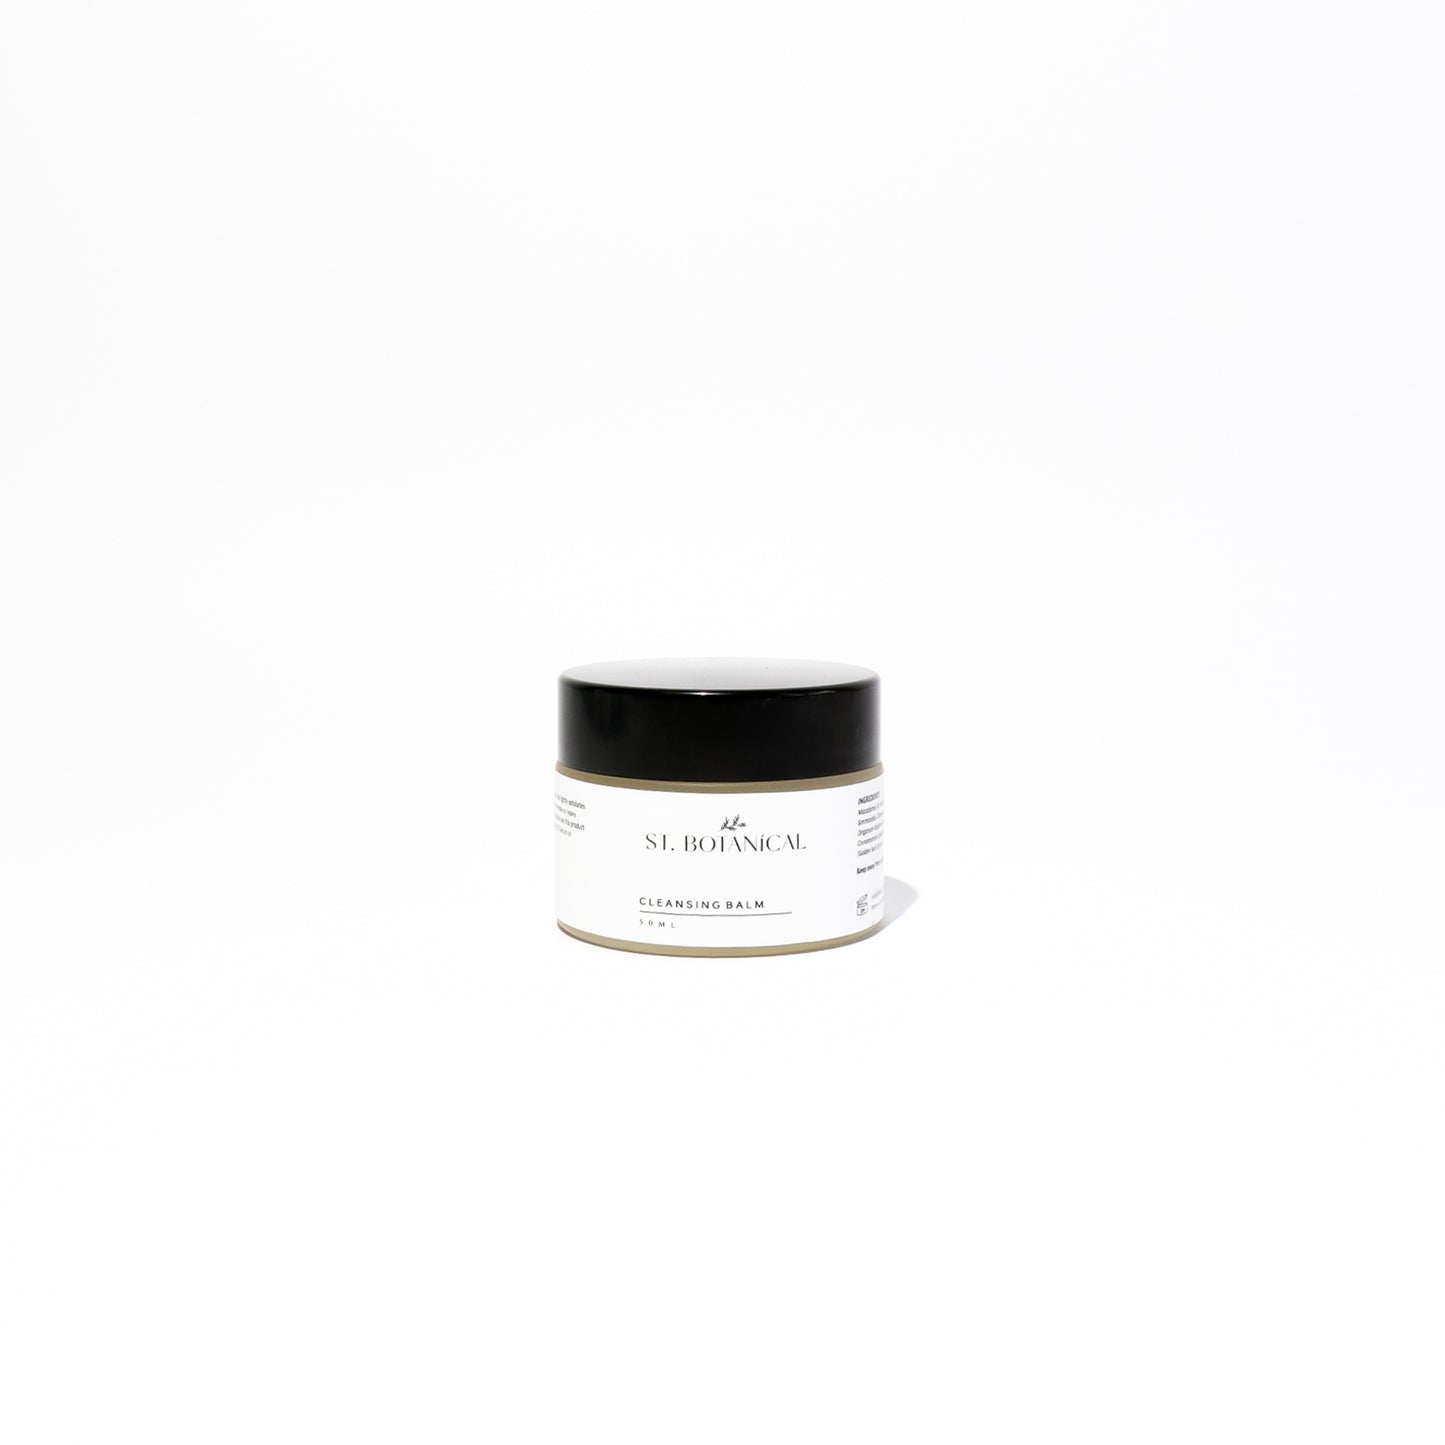 CLEANSING BALM